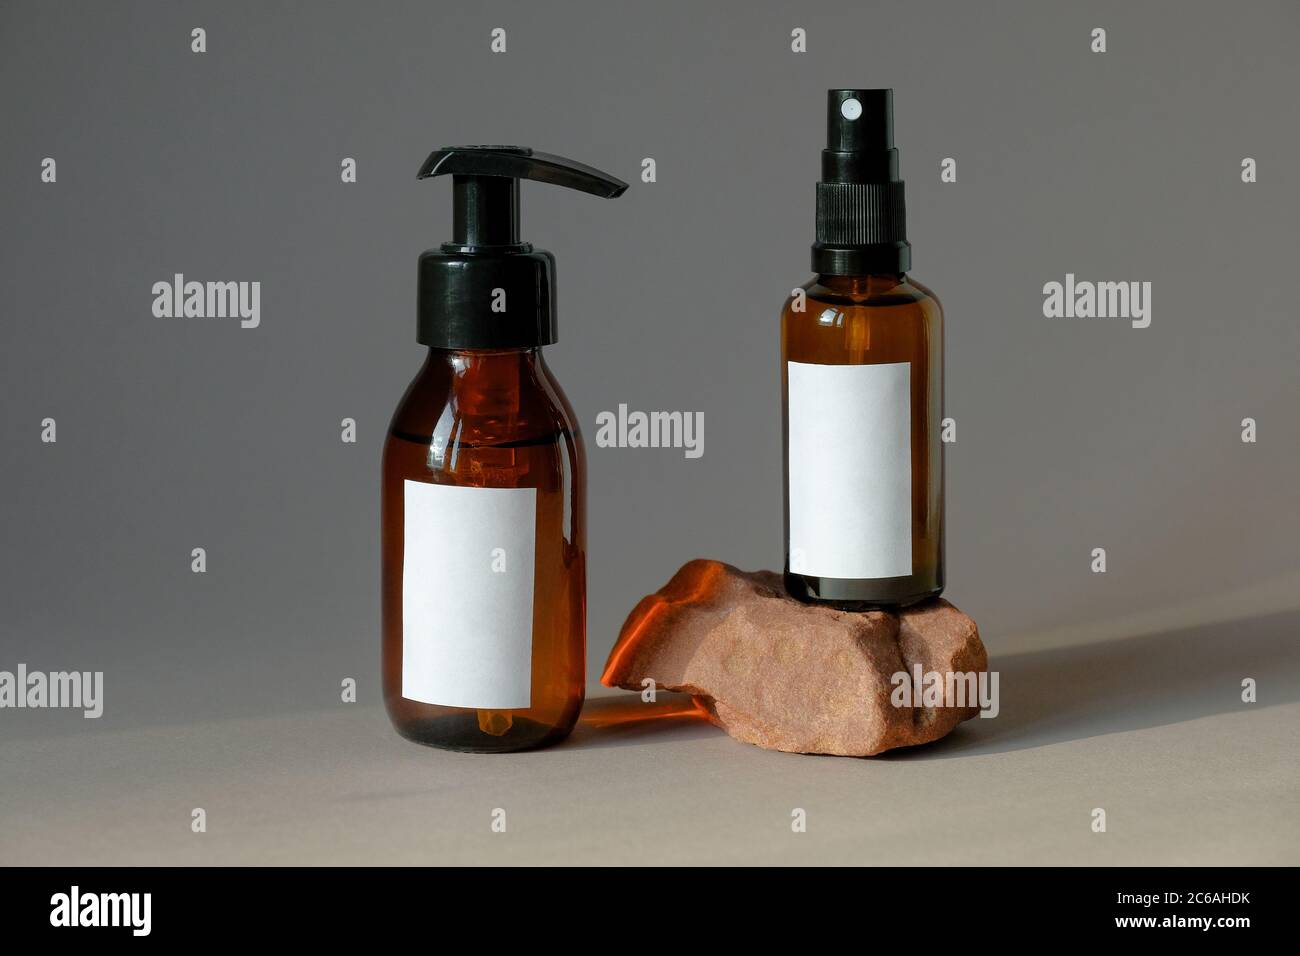 Download Amber Glass Cosmetic Bottles Mockups Natural Organic Hand Gel In Pump Bottle And Body Lotion In Spray Bottle Beauty Product Packaging Design Stock Photo Alamy